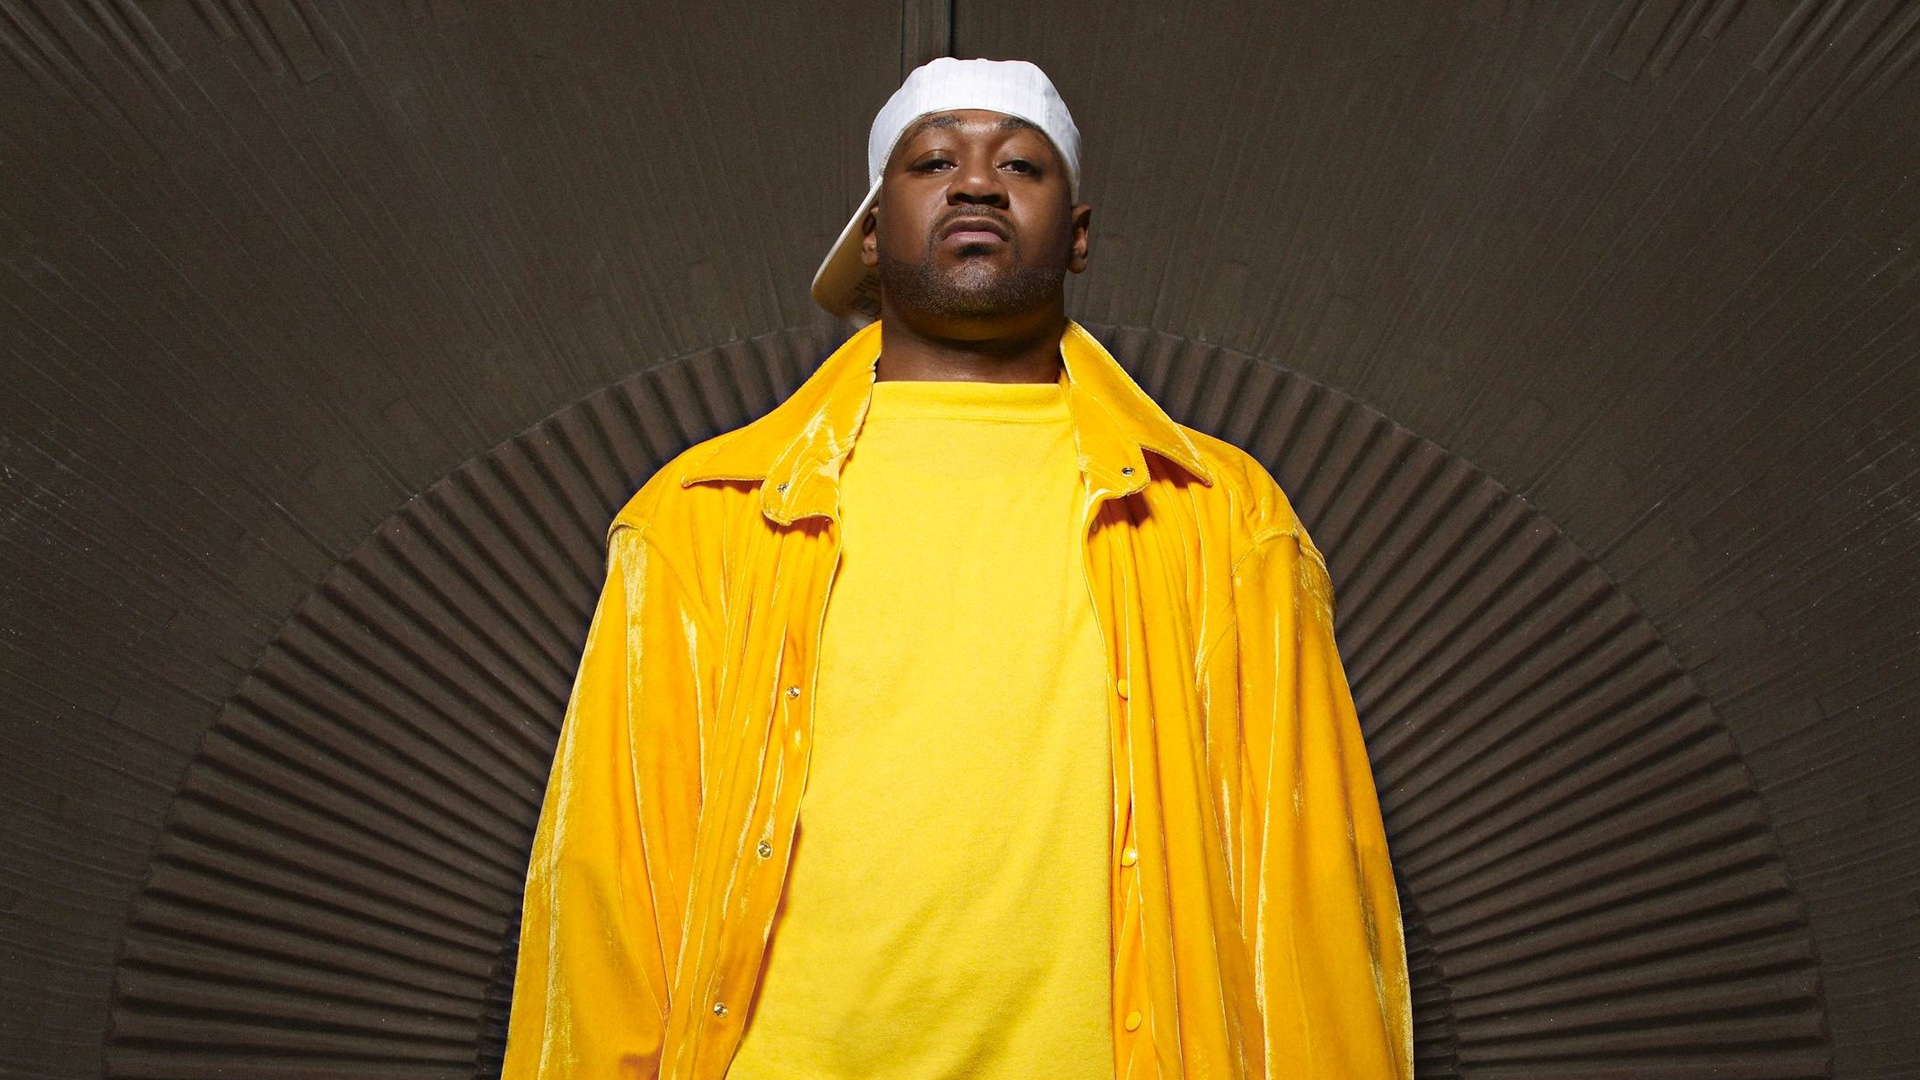 Ghostface Killah Wallpaper Image Photo Picture Background